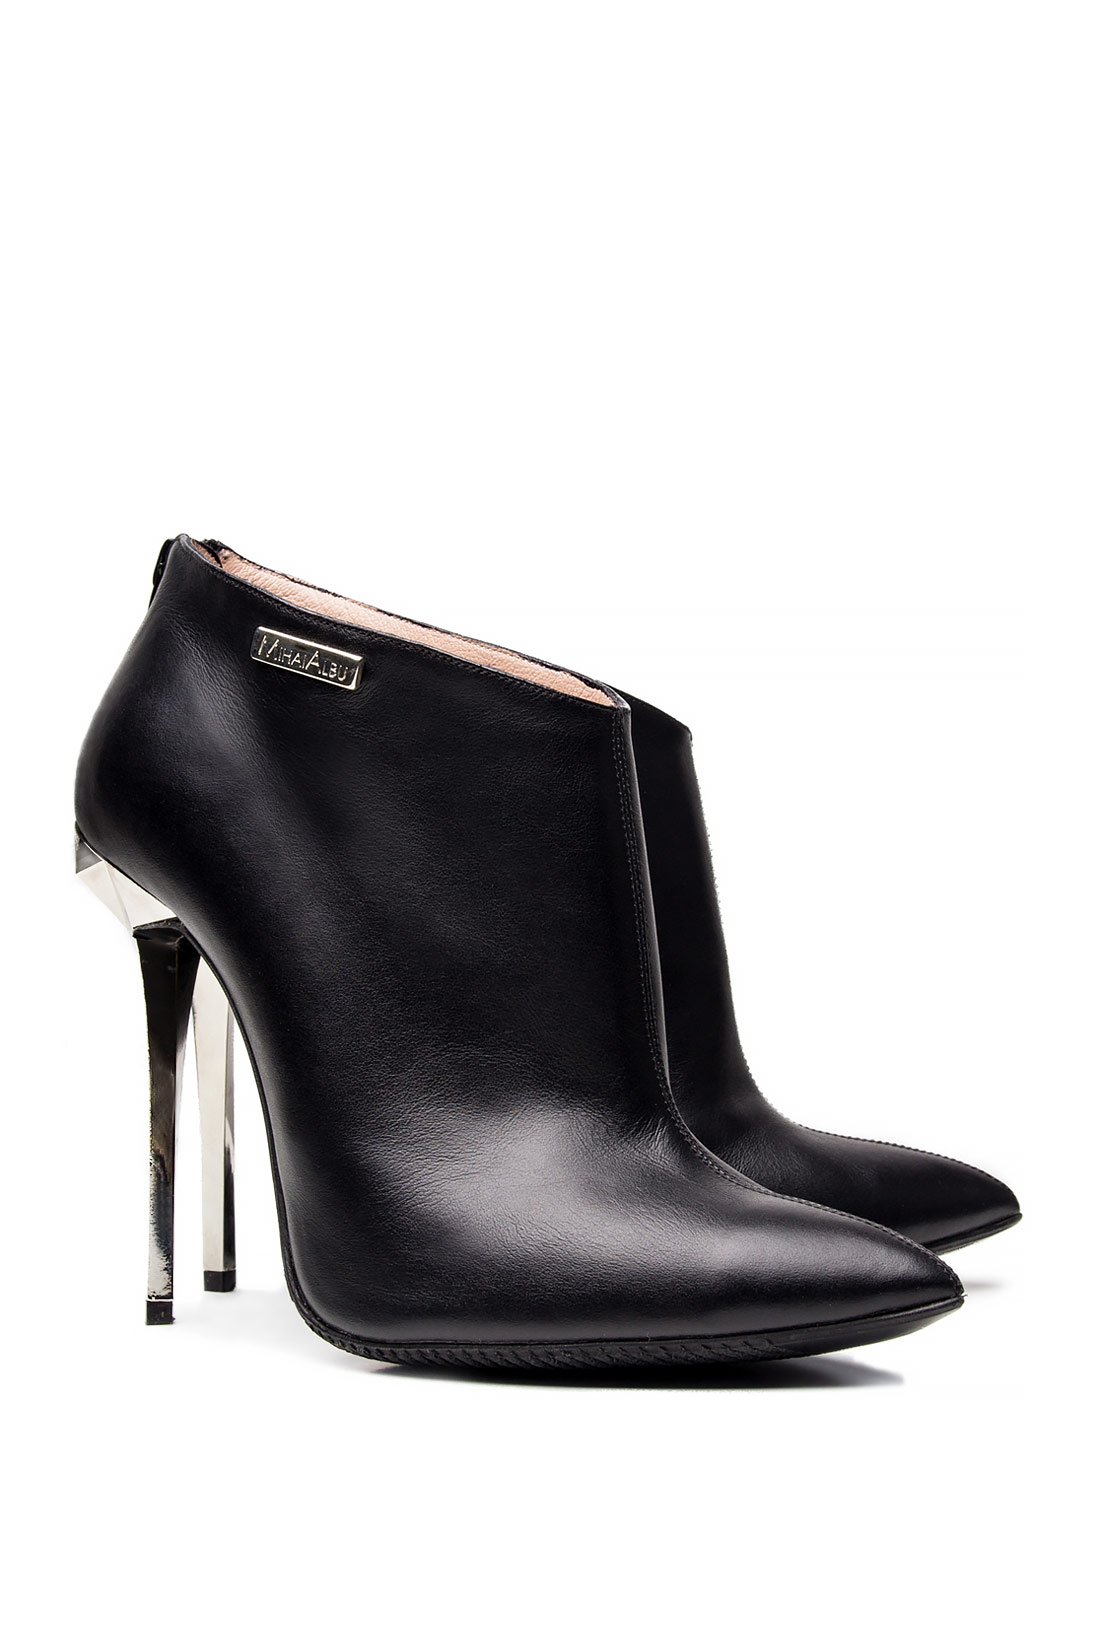 'STEALTH' leather ankle boots Mihai Albu image 1